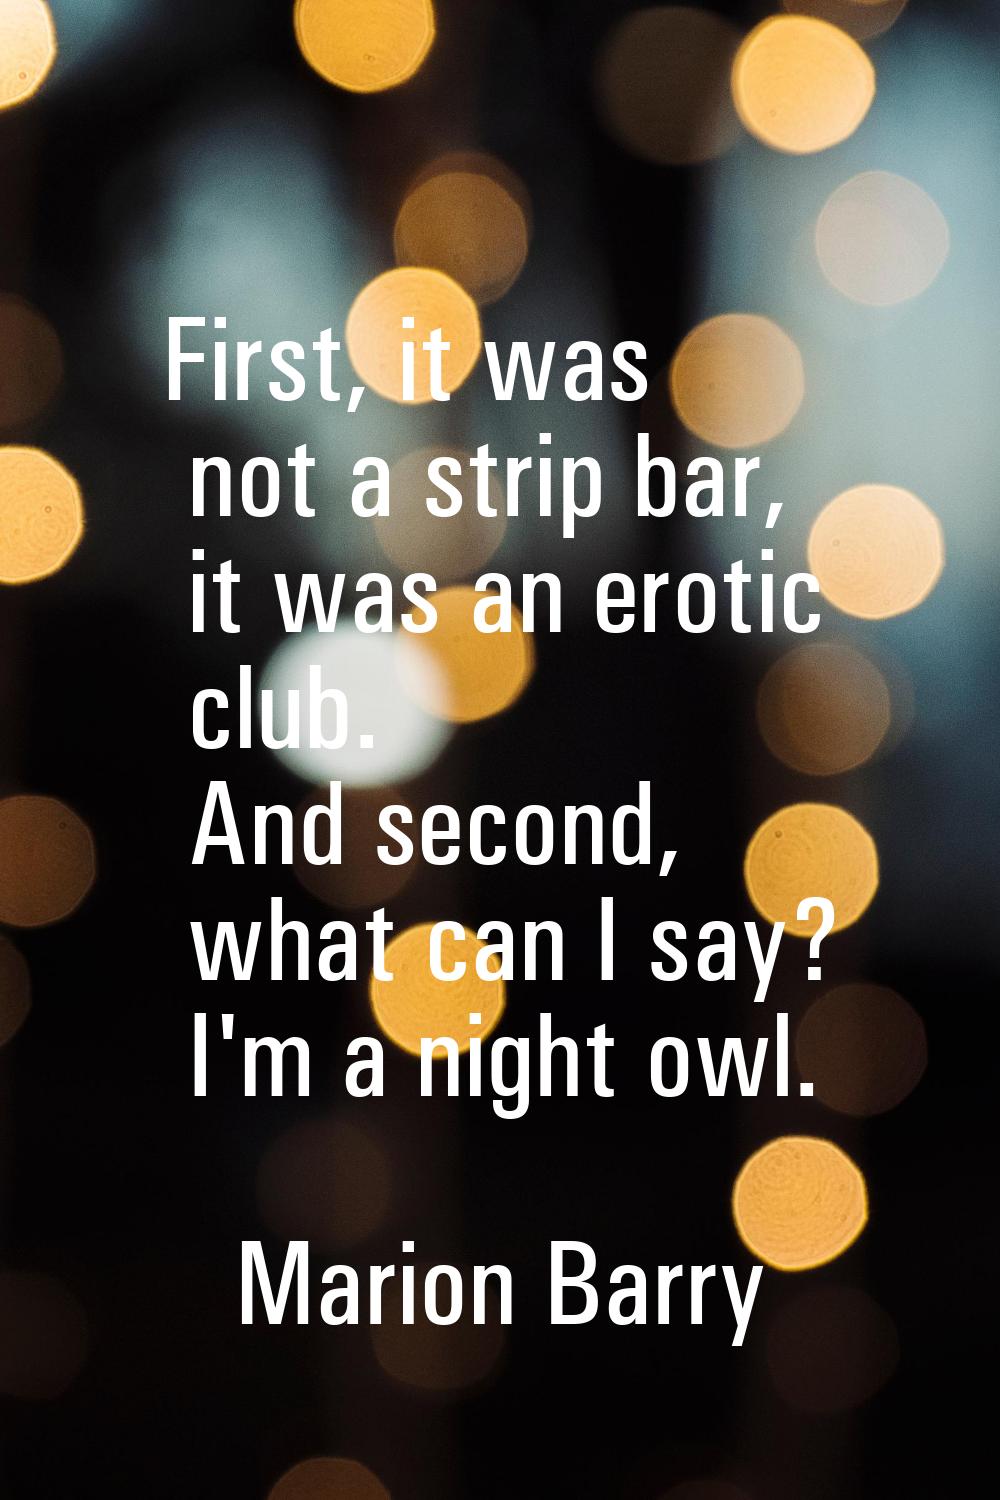 First, it was not a strip bar, it was an erotic club. And second, what can I say? I'm a night owl.